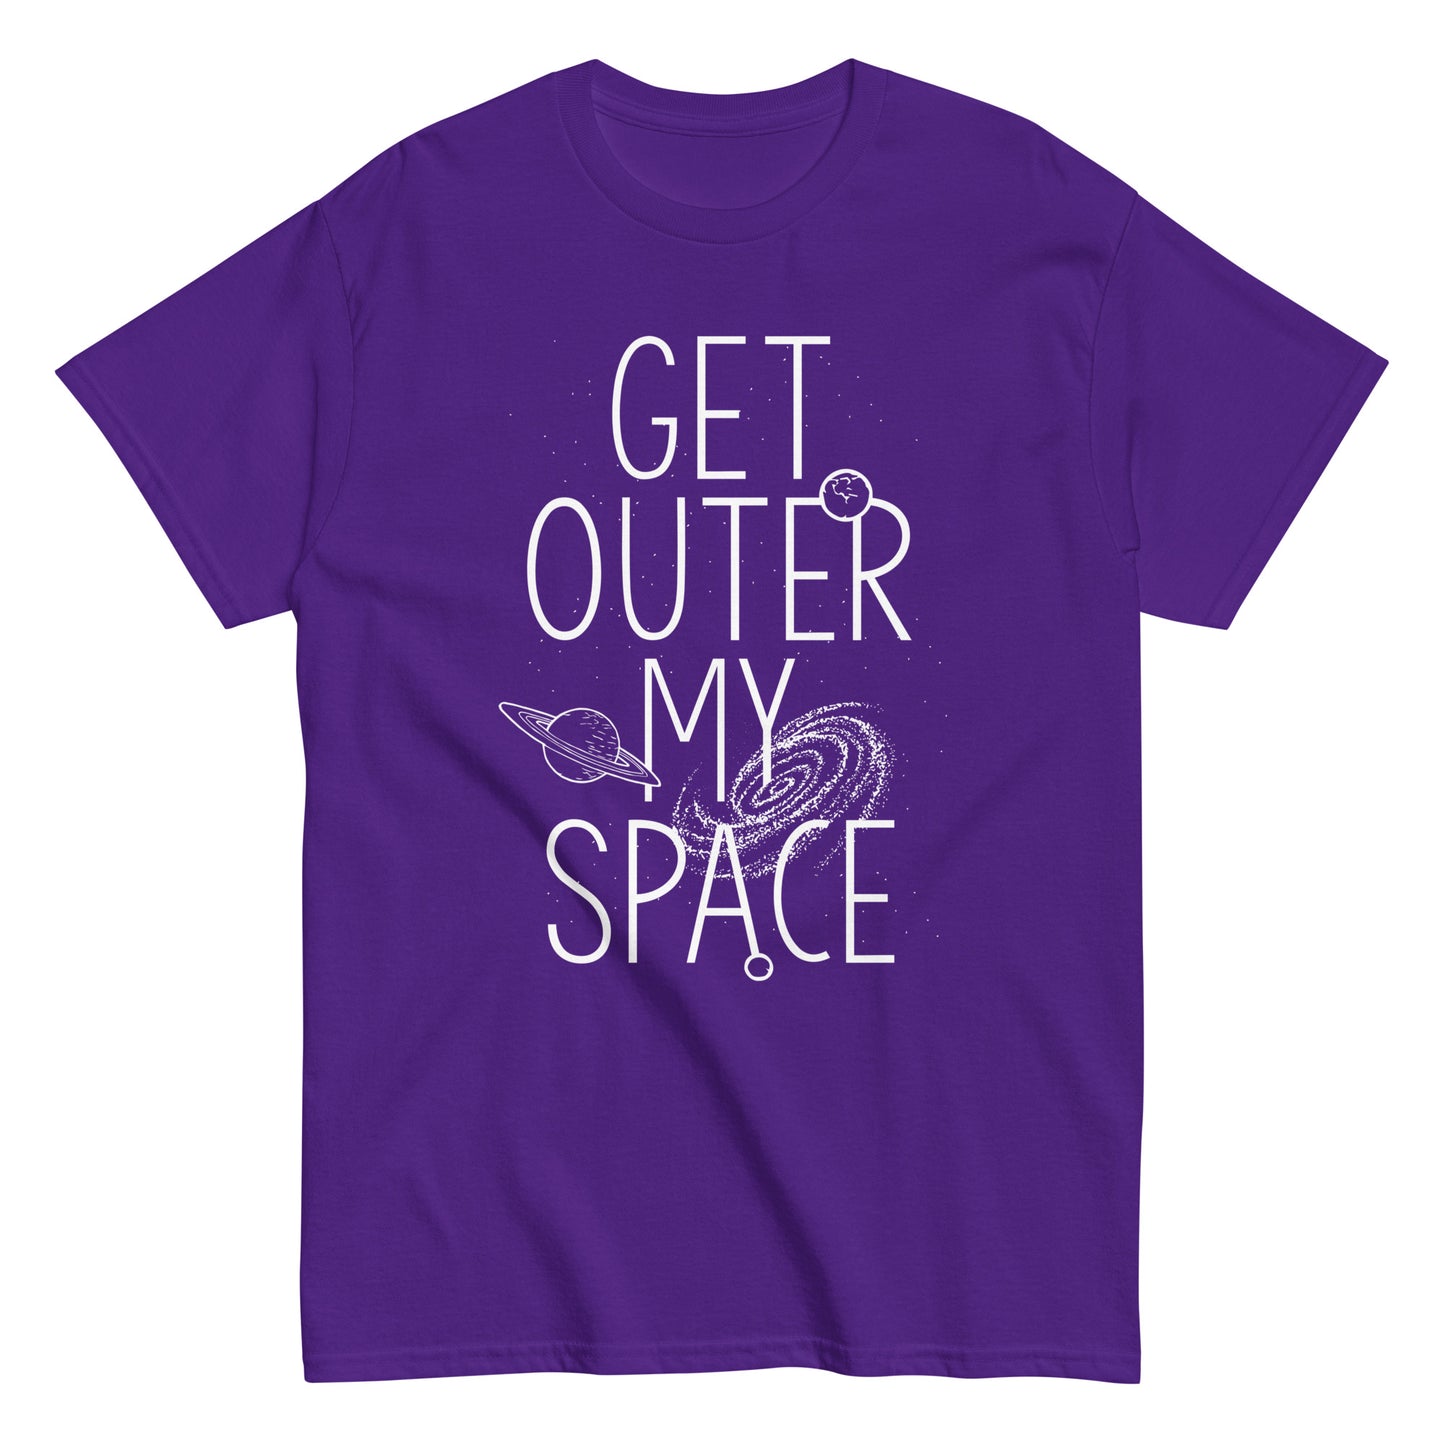 Get Outer My Space Men's Classic Tee